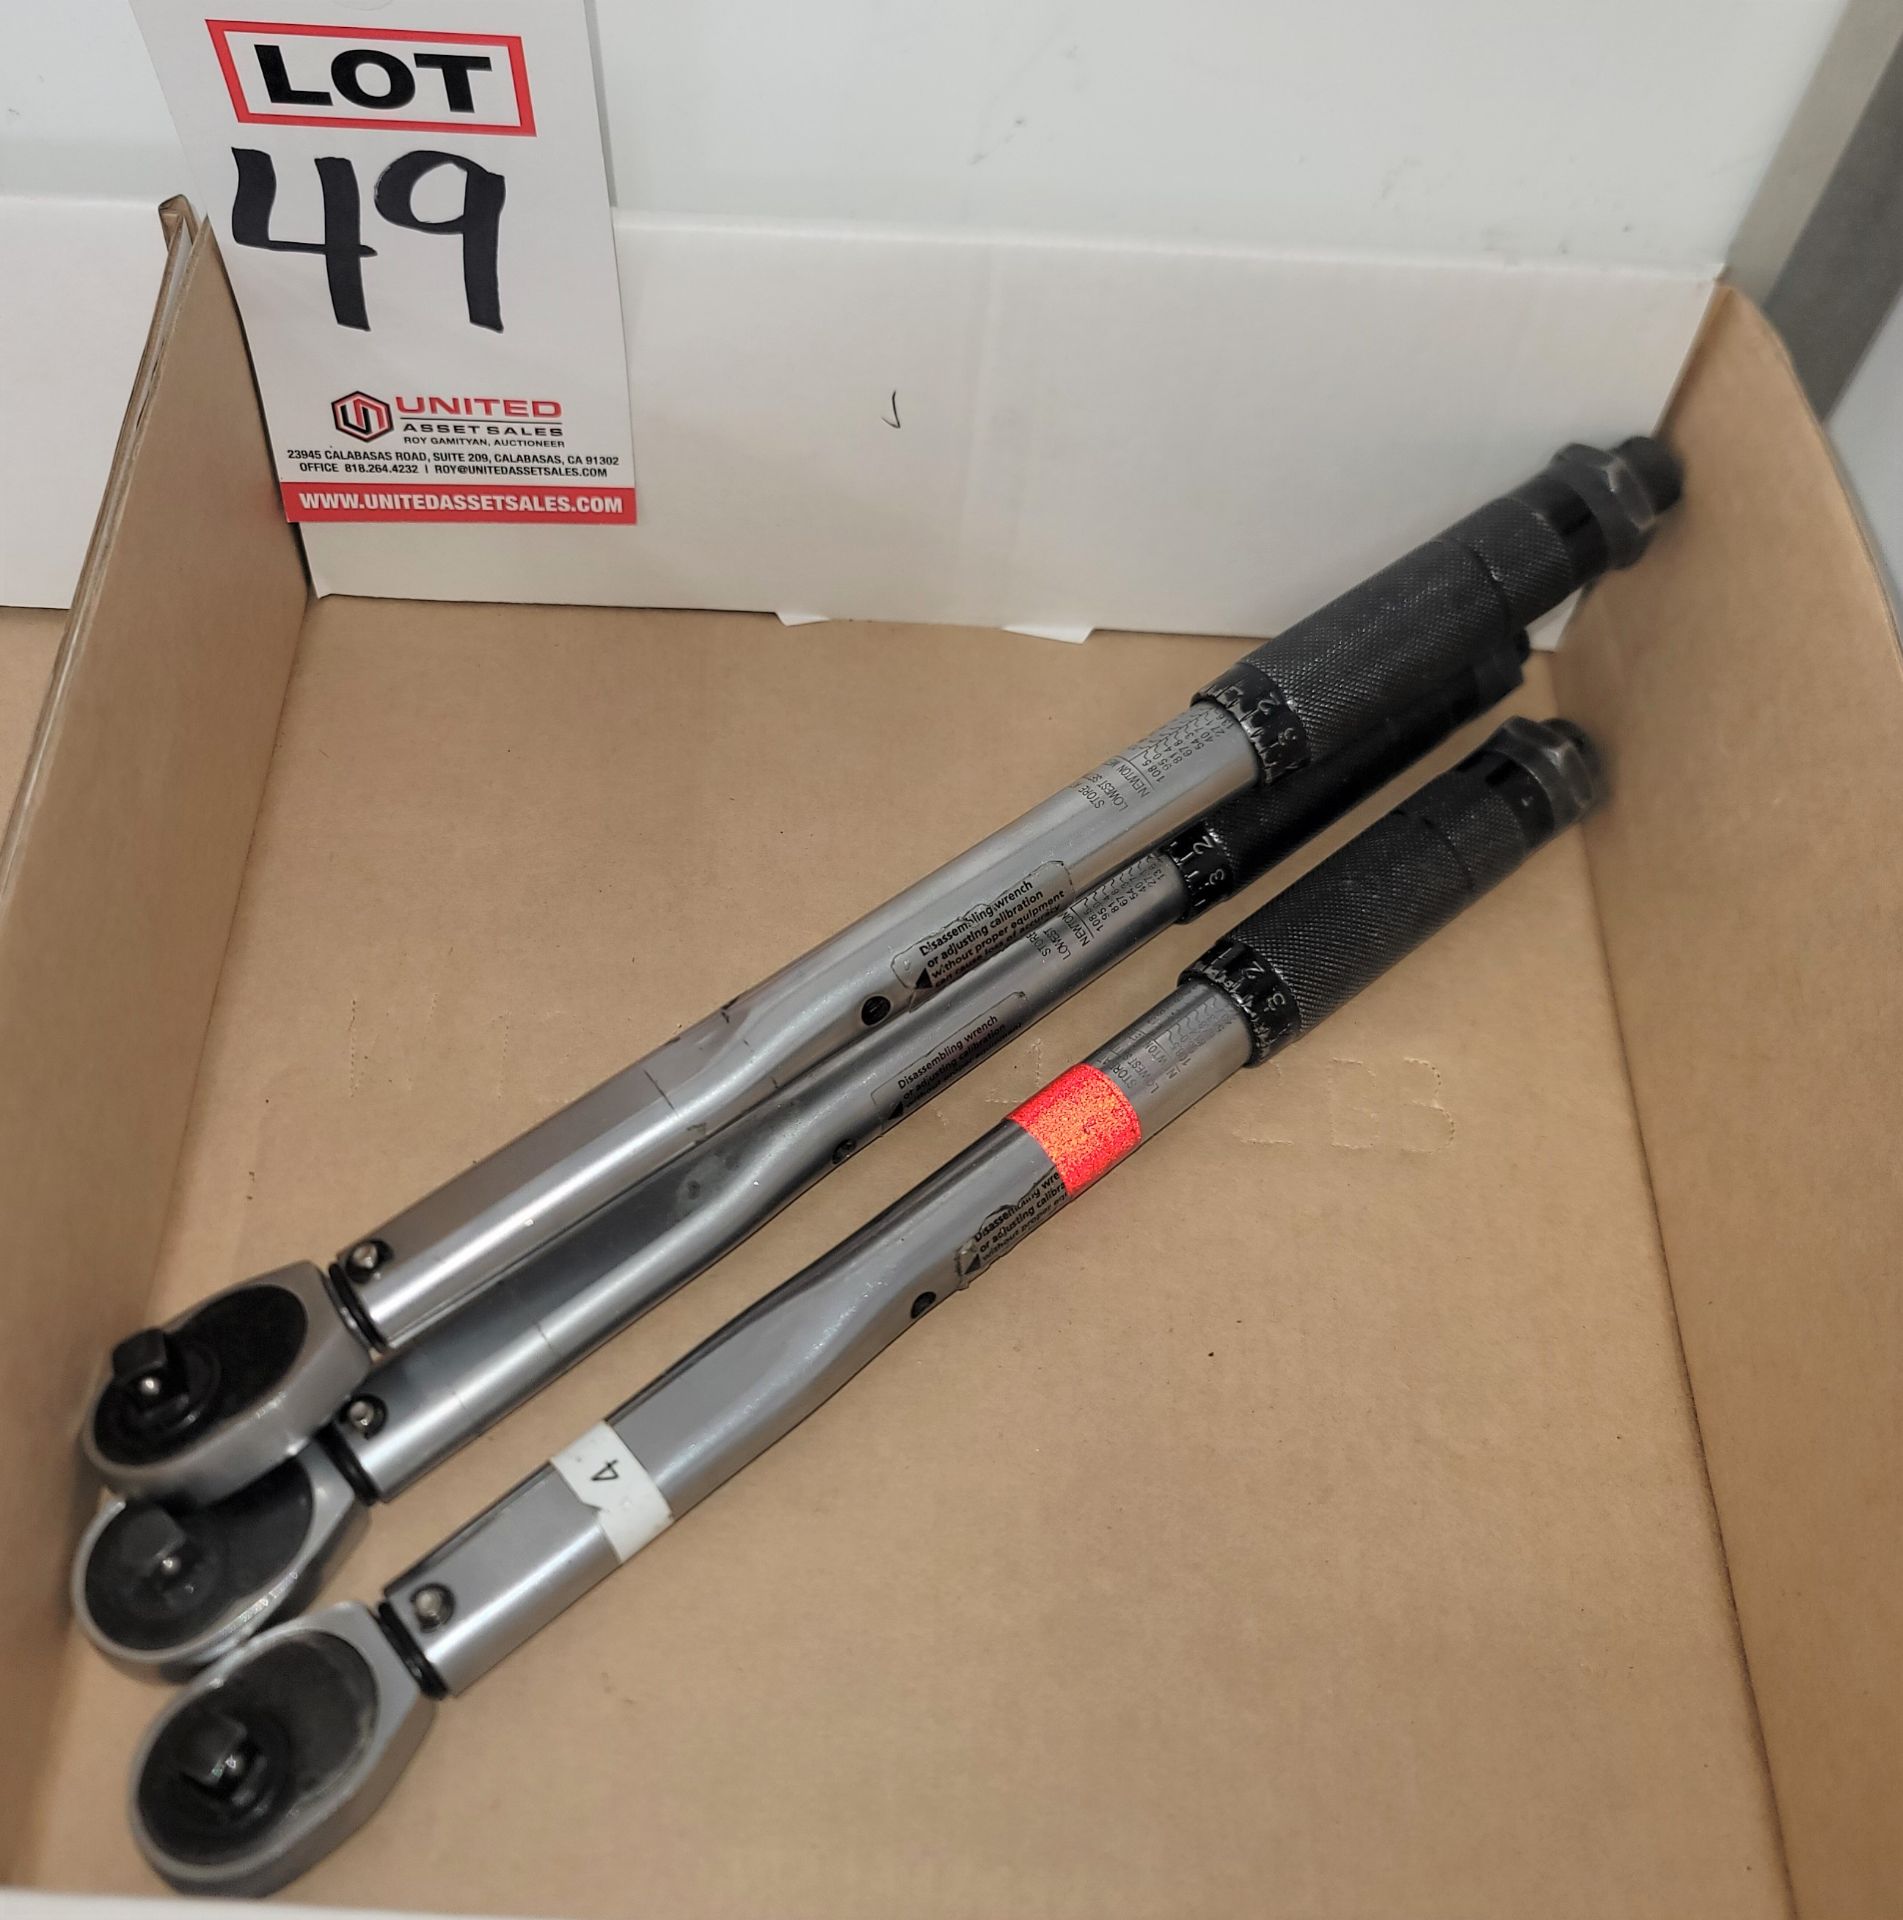 LOT - (3) 3/8" DRIVE TORQUE WRENCHES, GREATNECK & TEKTON BRAND